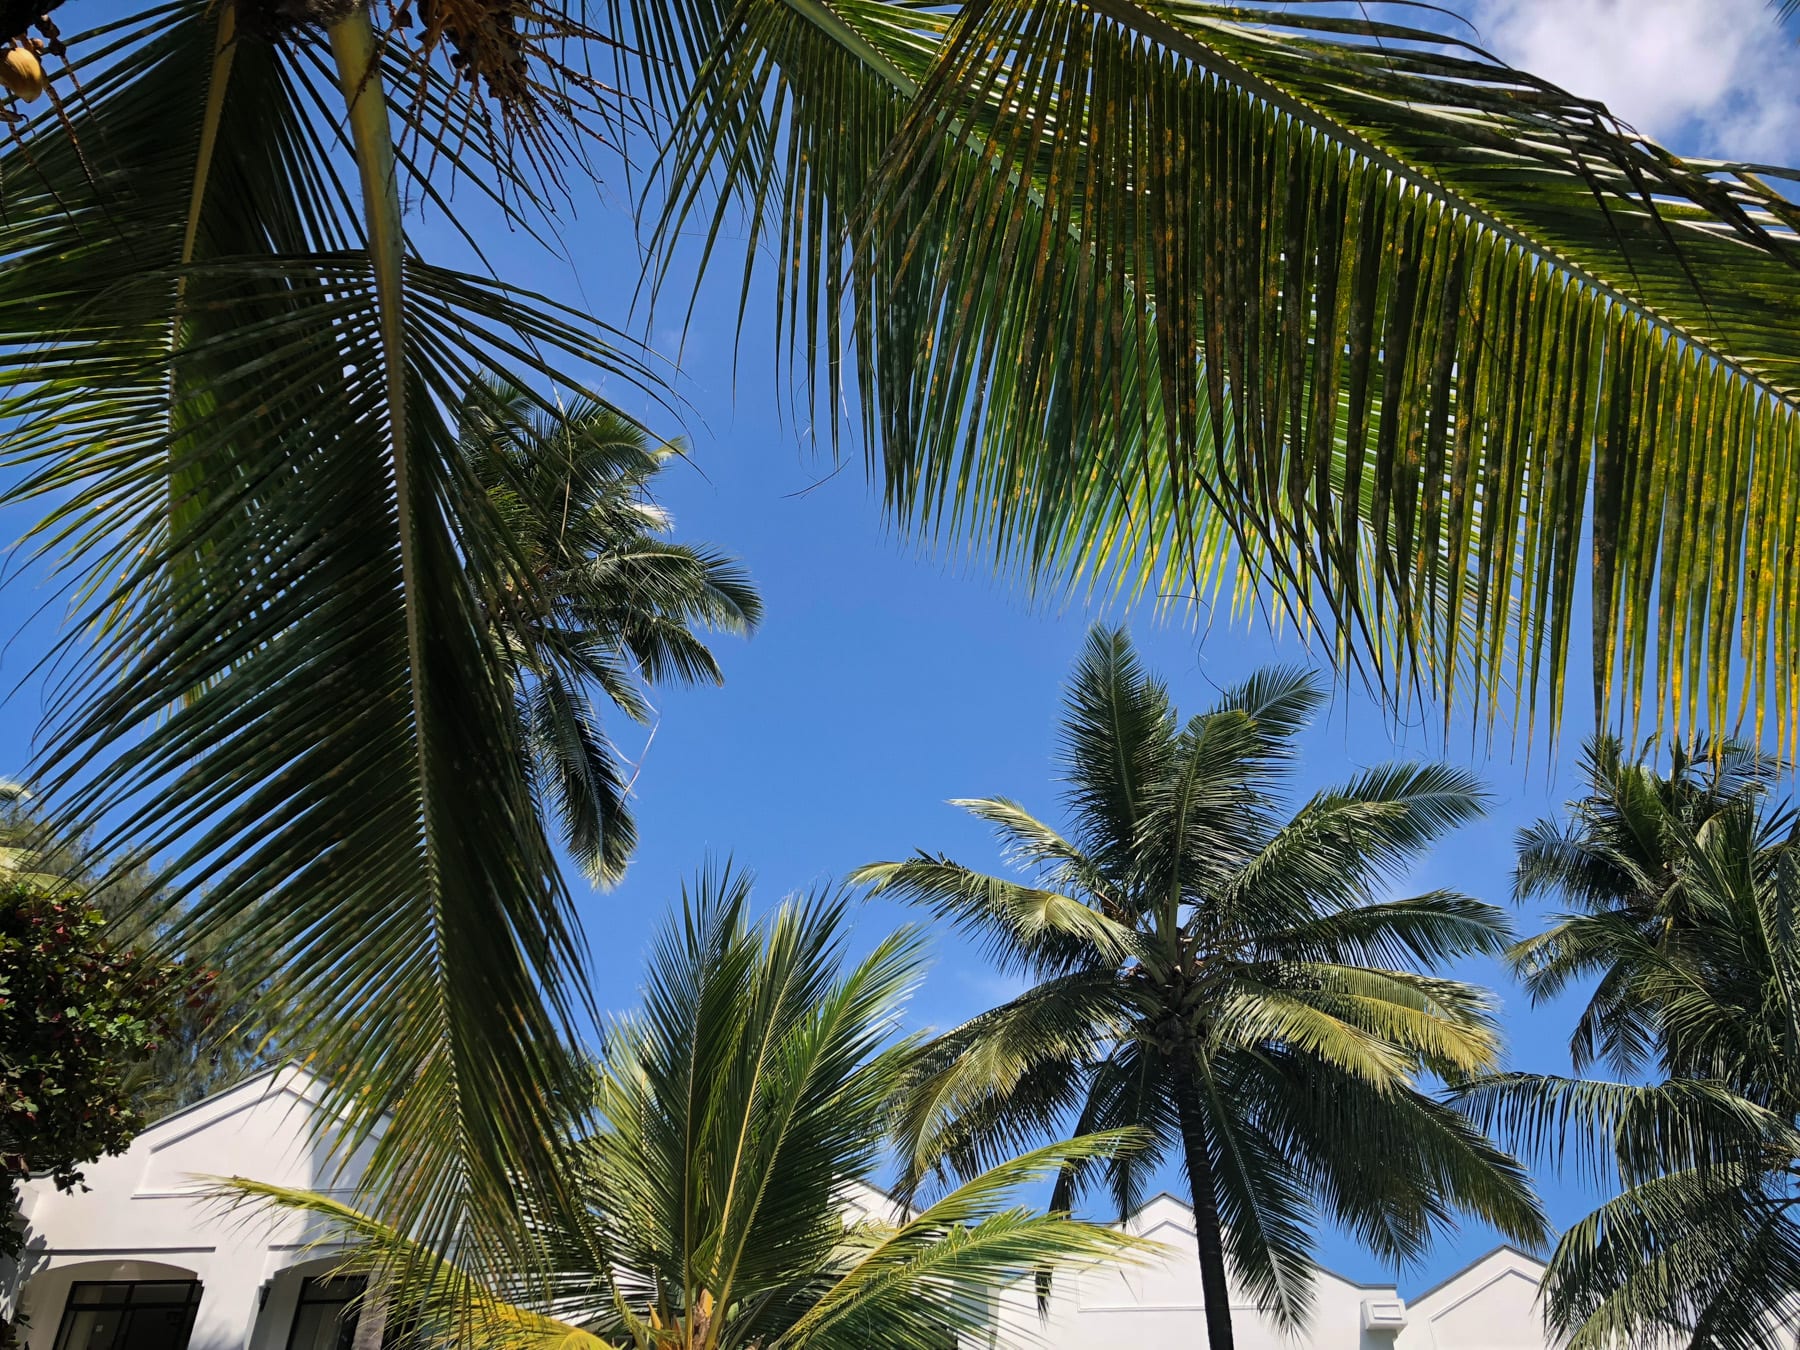 The coast plays host to tropical beaches and countless palm trees.